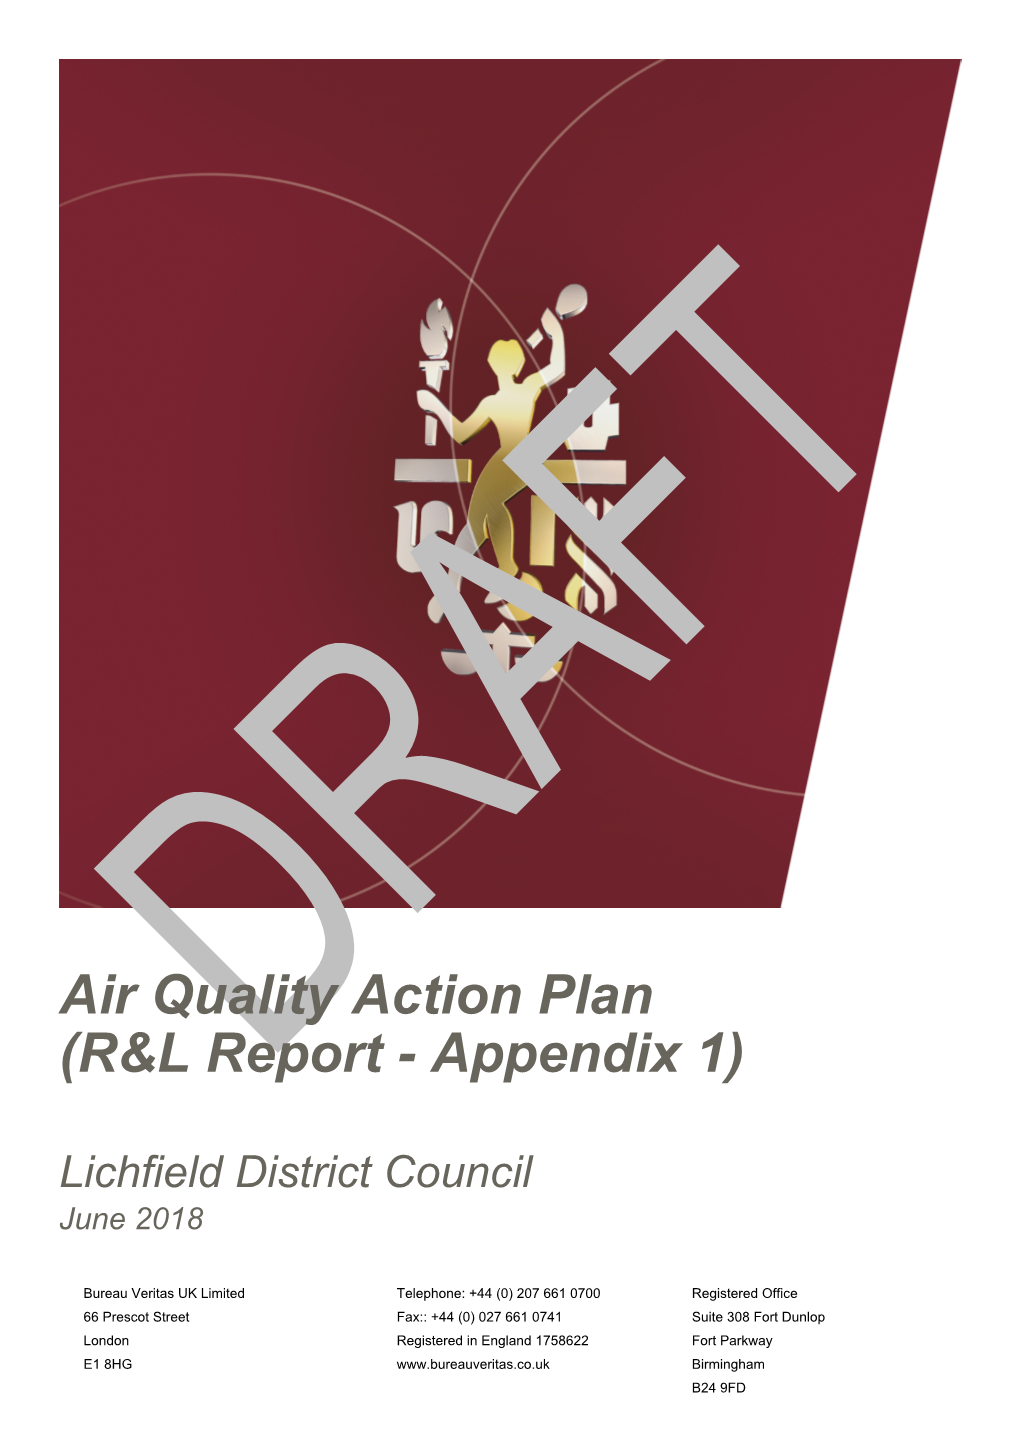 Executive Summary This Air Quality Action Plan (AQAP) Has Been Produced As Part of Our Statutory Duties Required by the Local Air Quality Management Framework